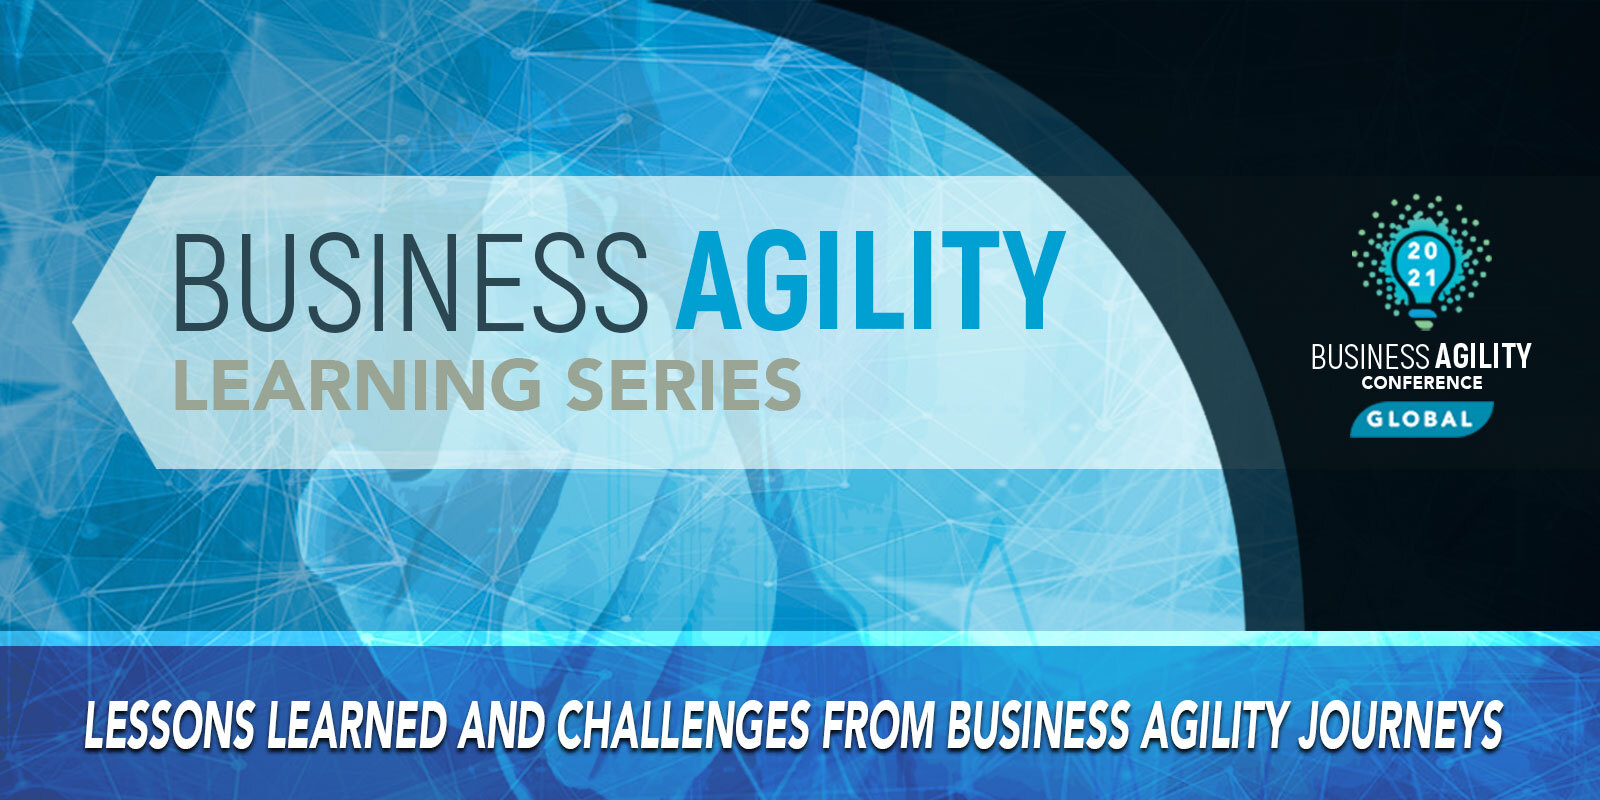 Leading in Complexity: Why Agility Allows Us to Thrive in an Unpredictable World